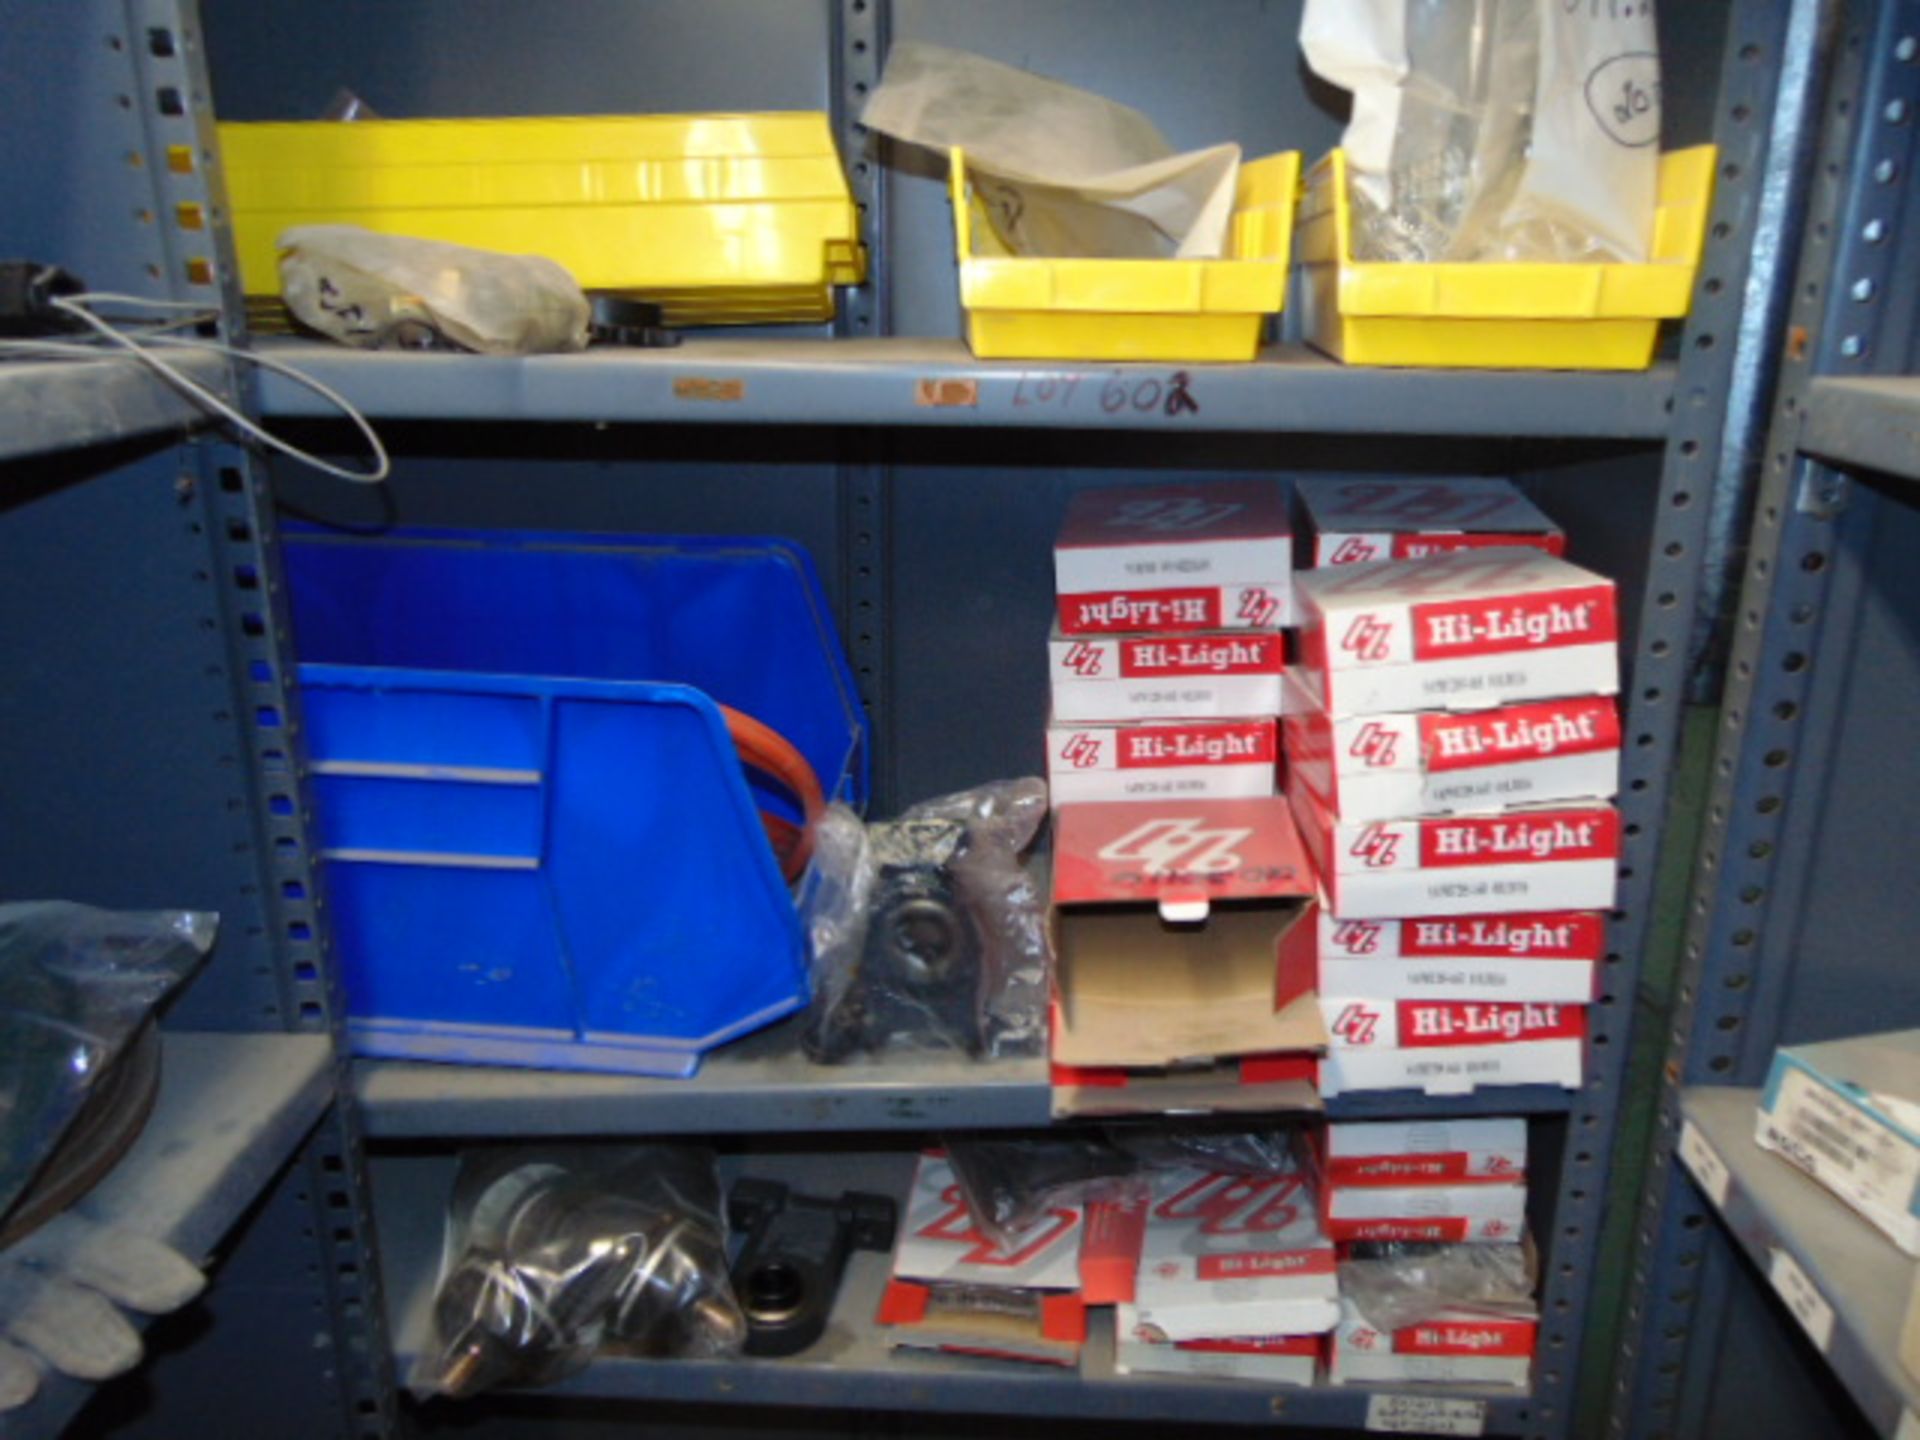 LOT OF BLOCK ROLLER BEARINGS & MISC., assorted (in three sections of shelving) (No shelving) - Image 5 of 5